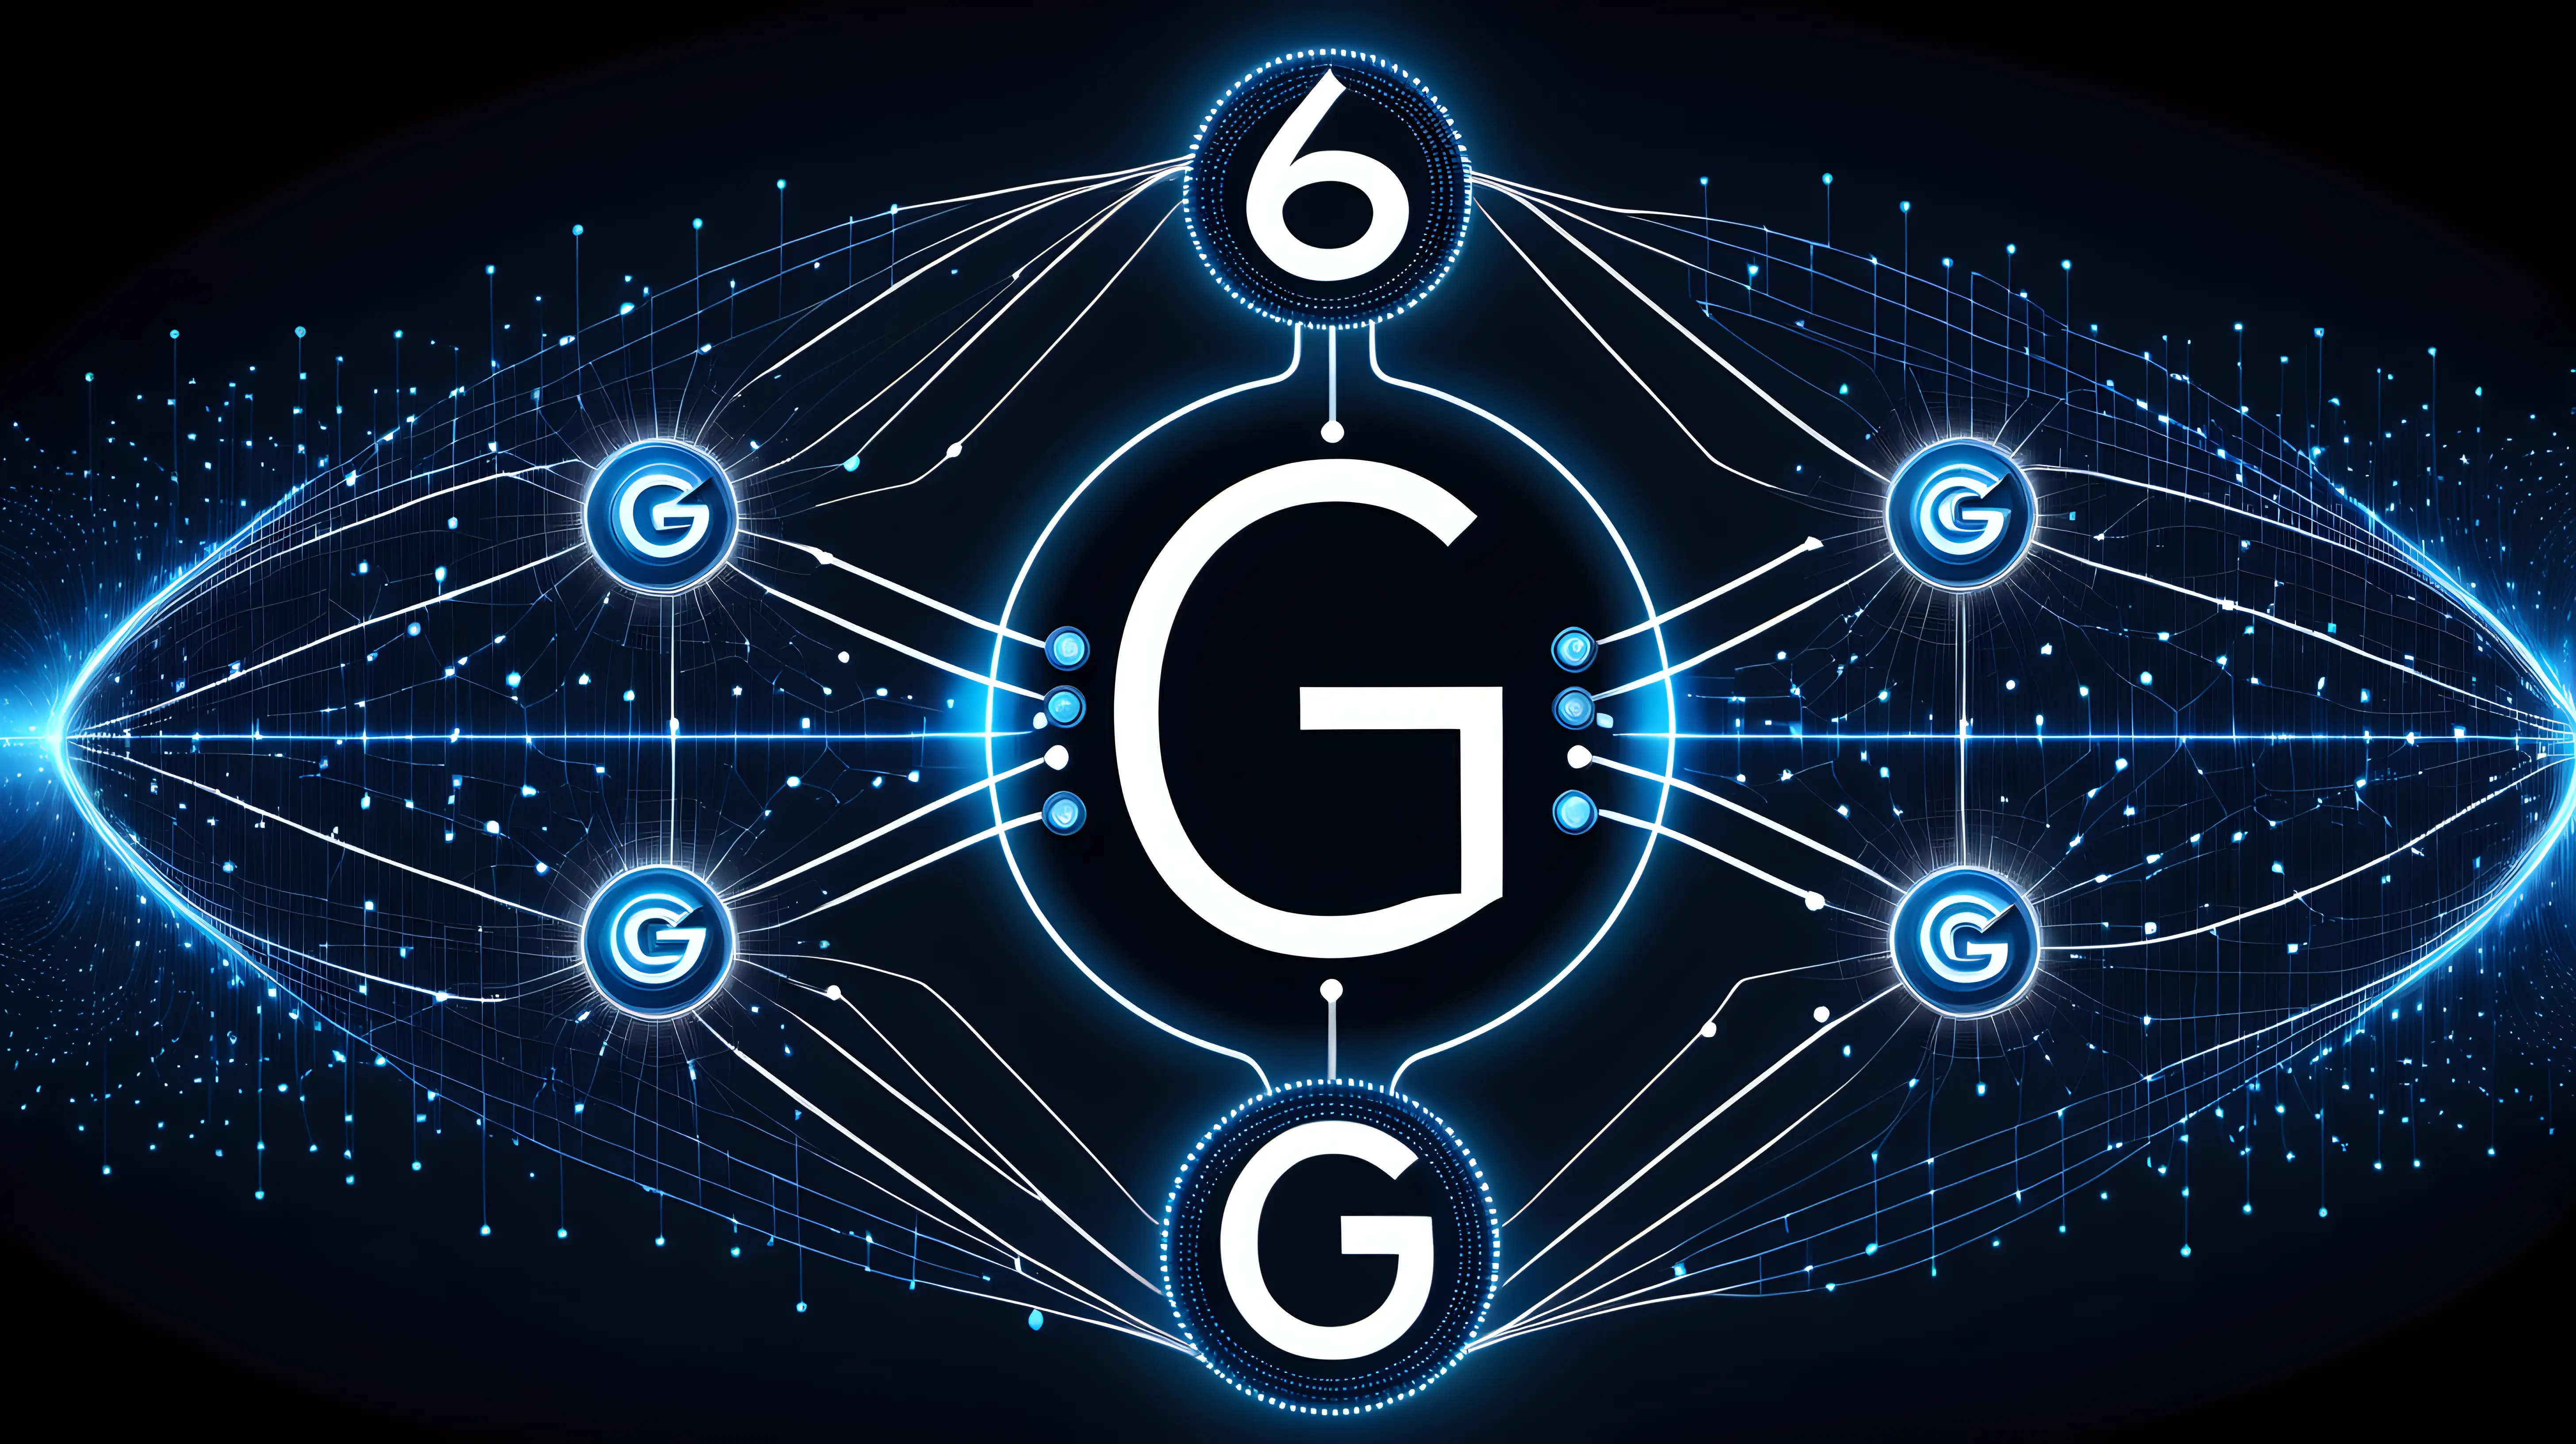 ]An abstract representation of data streams and connectivity pathways with the central focus on the illuminated "6G" emblem, illustrating the speed and efficiency of sixth-generation networks.